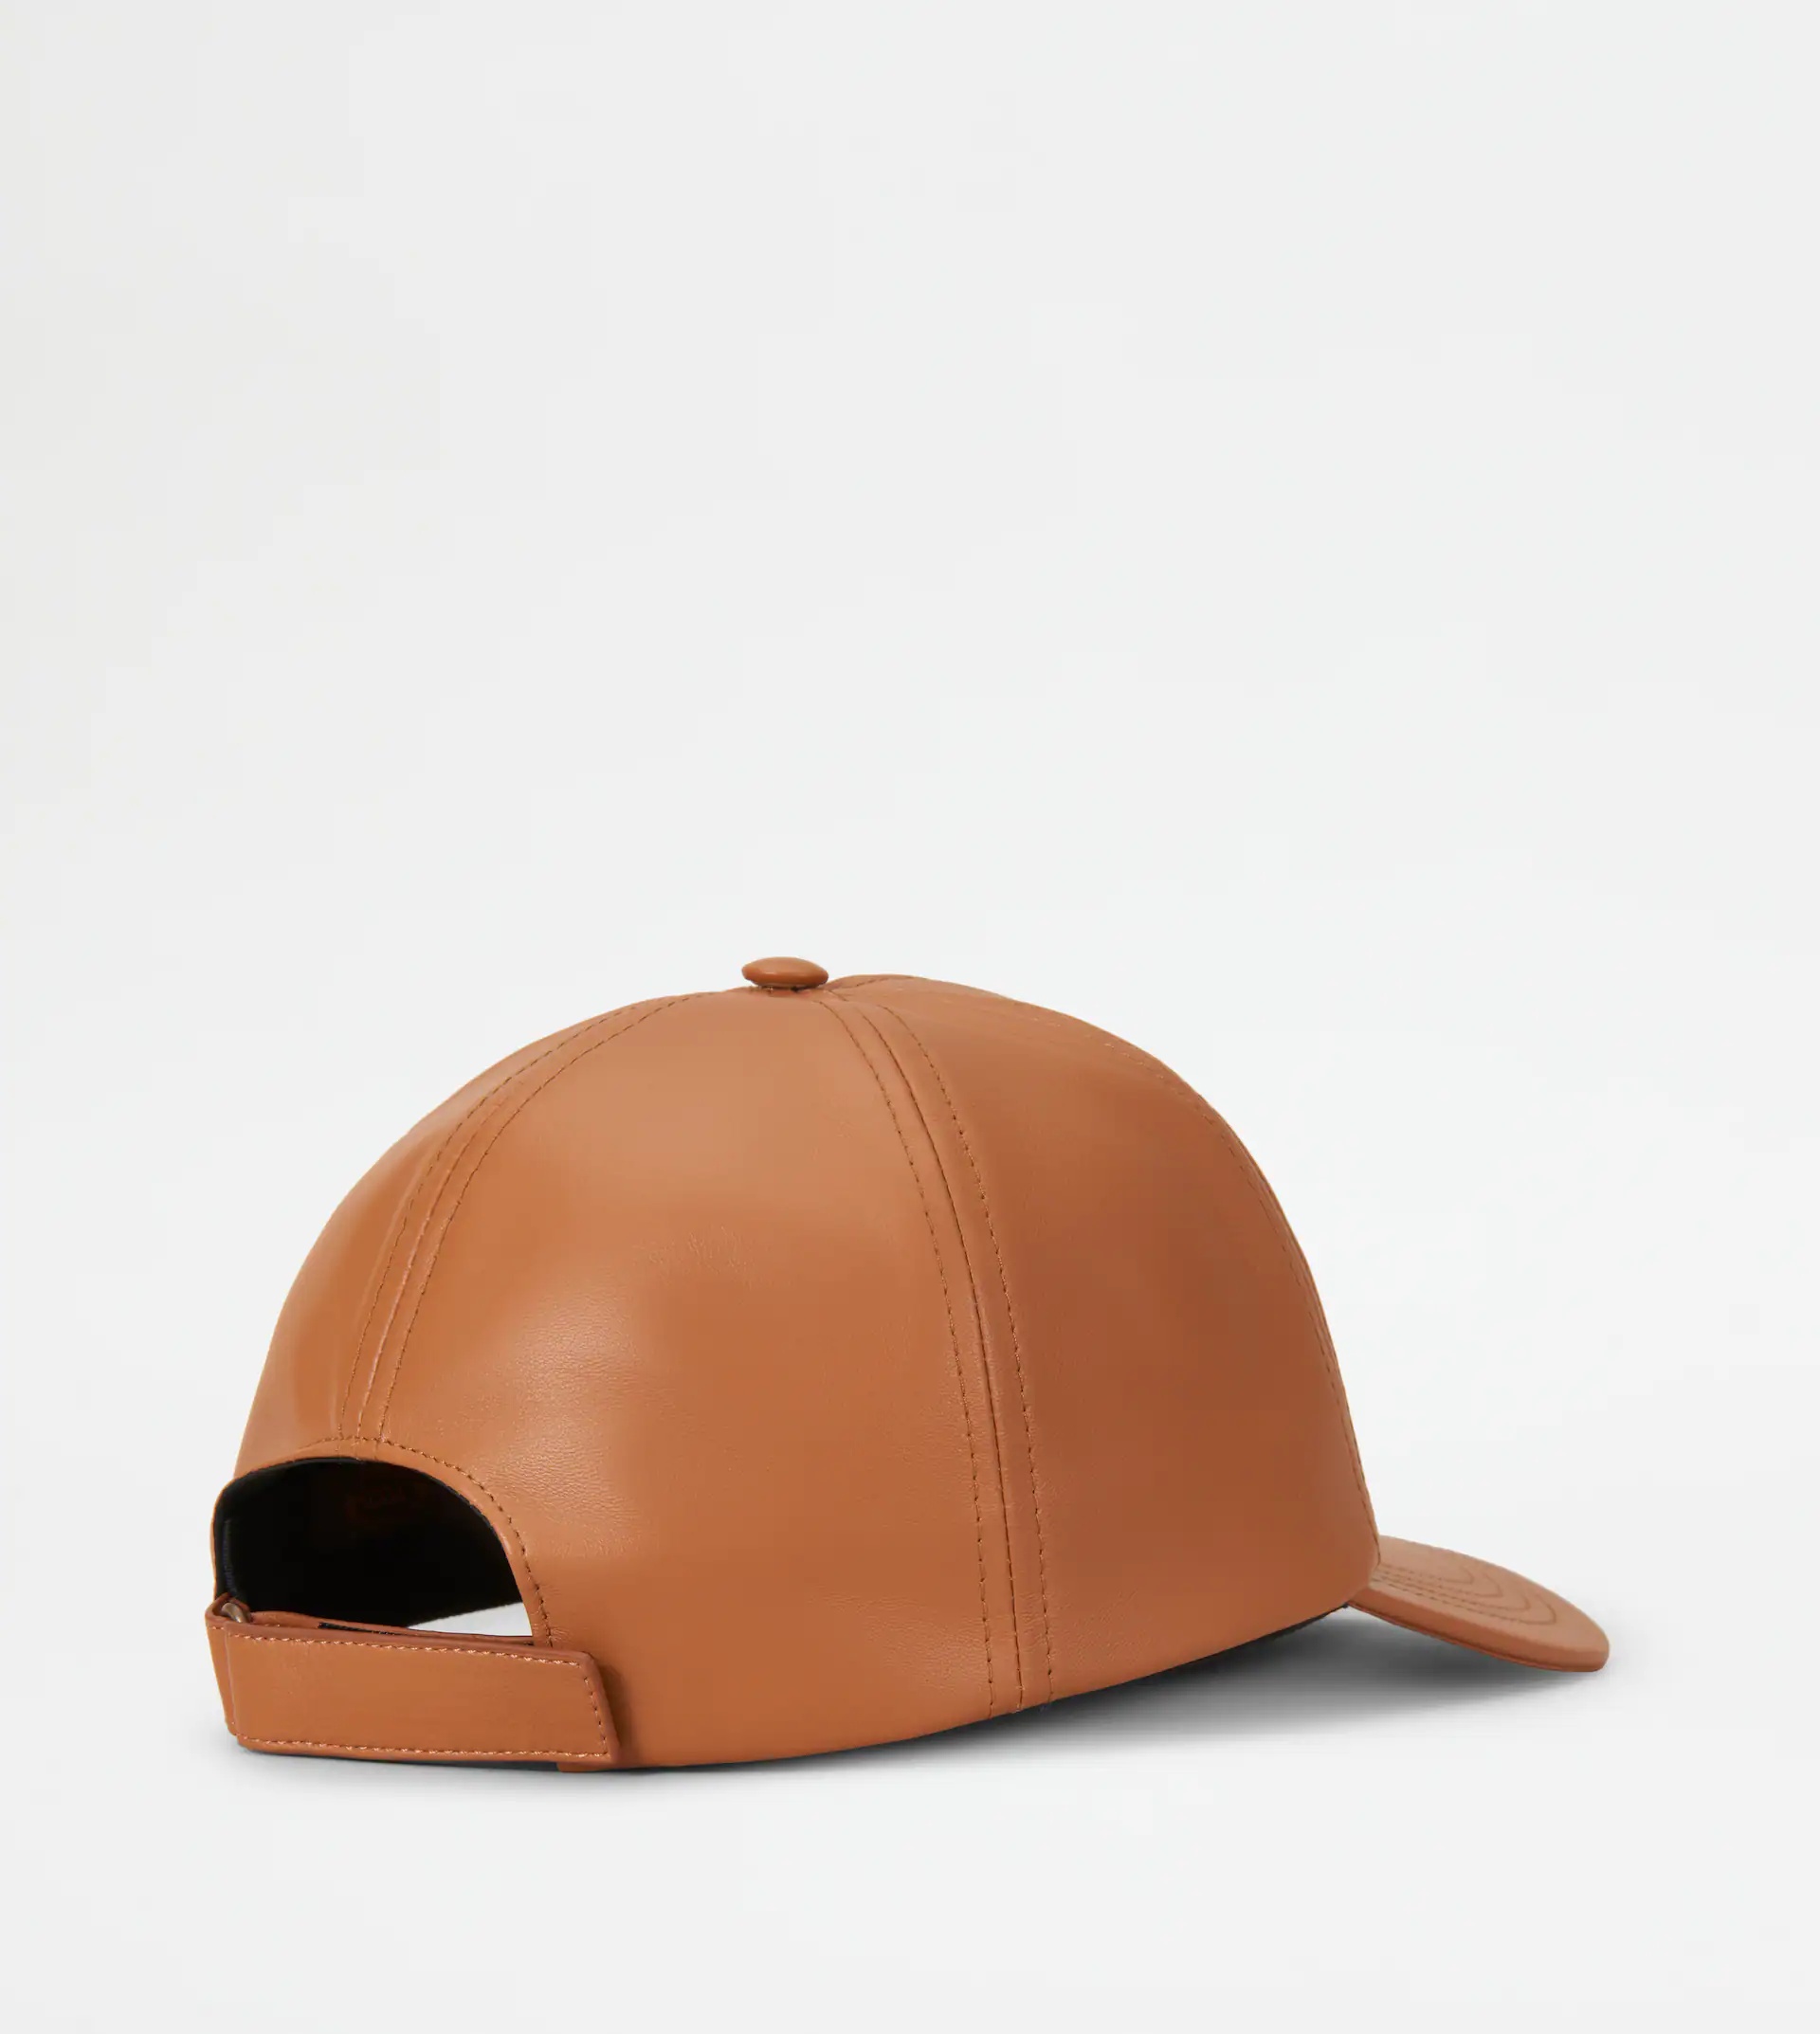 LEATHER CAP - BROWN - 3